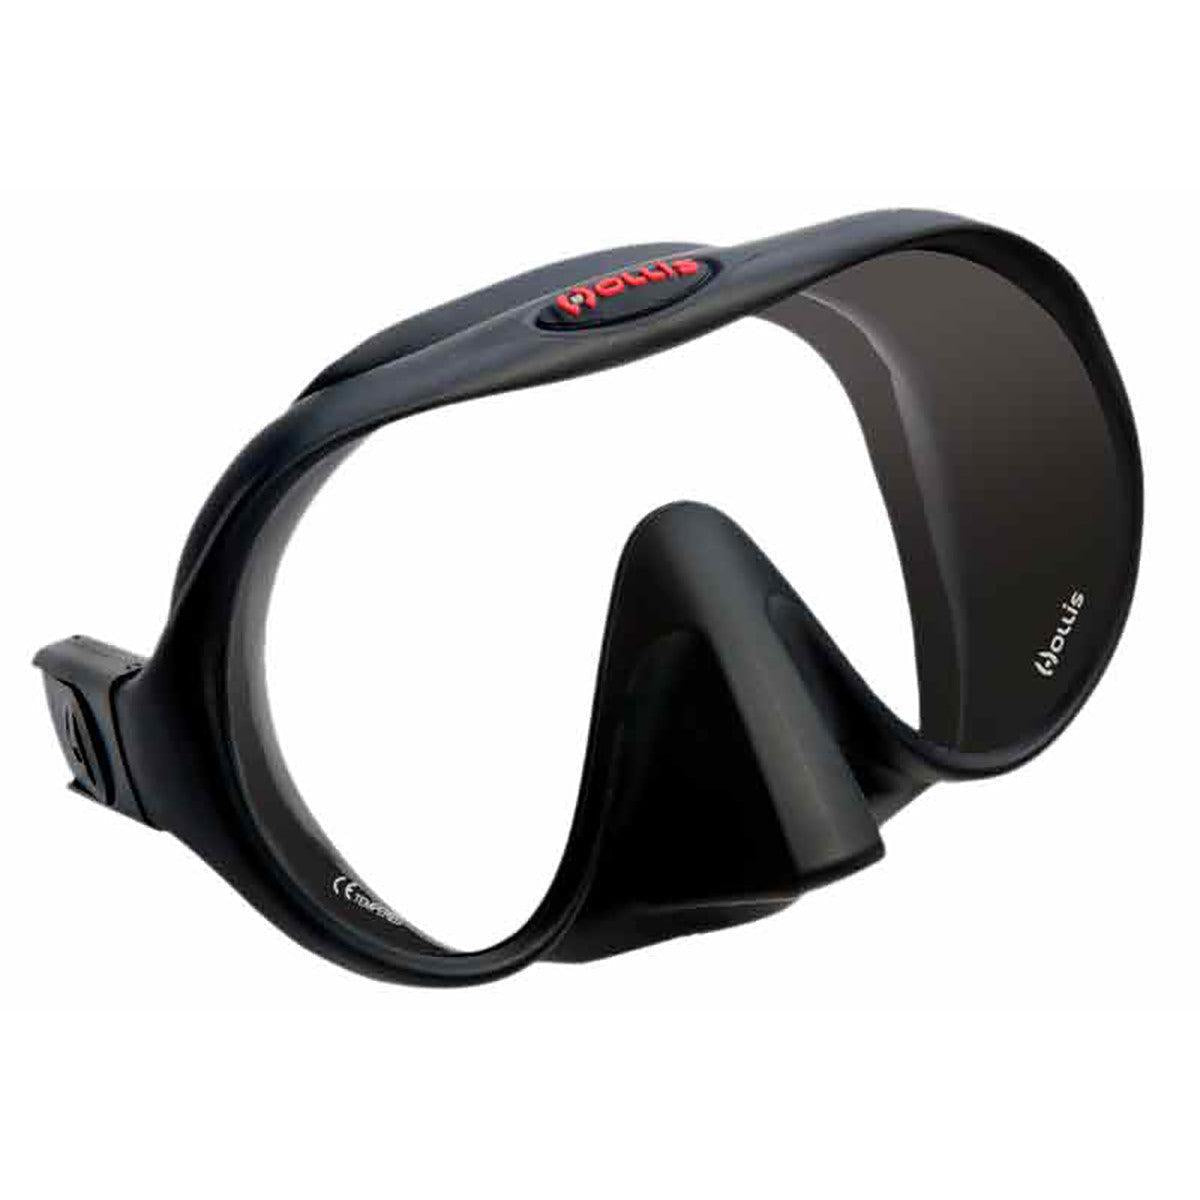 NEW Hollis M3 Mask w/GoPro Mount Black Color Available 